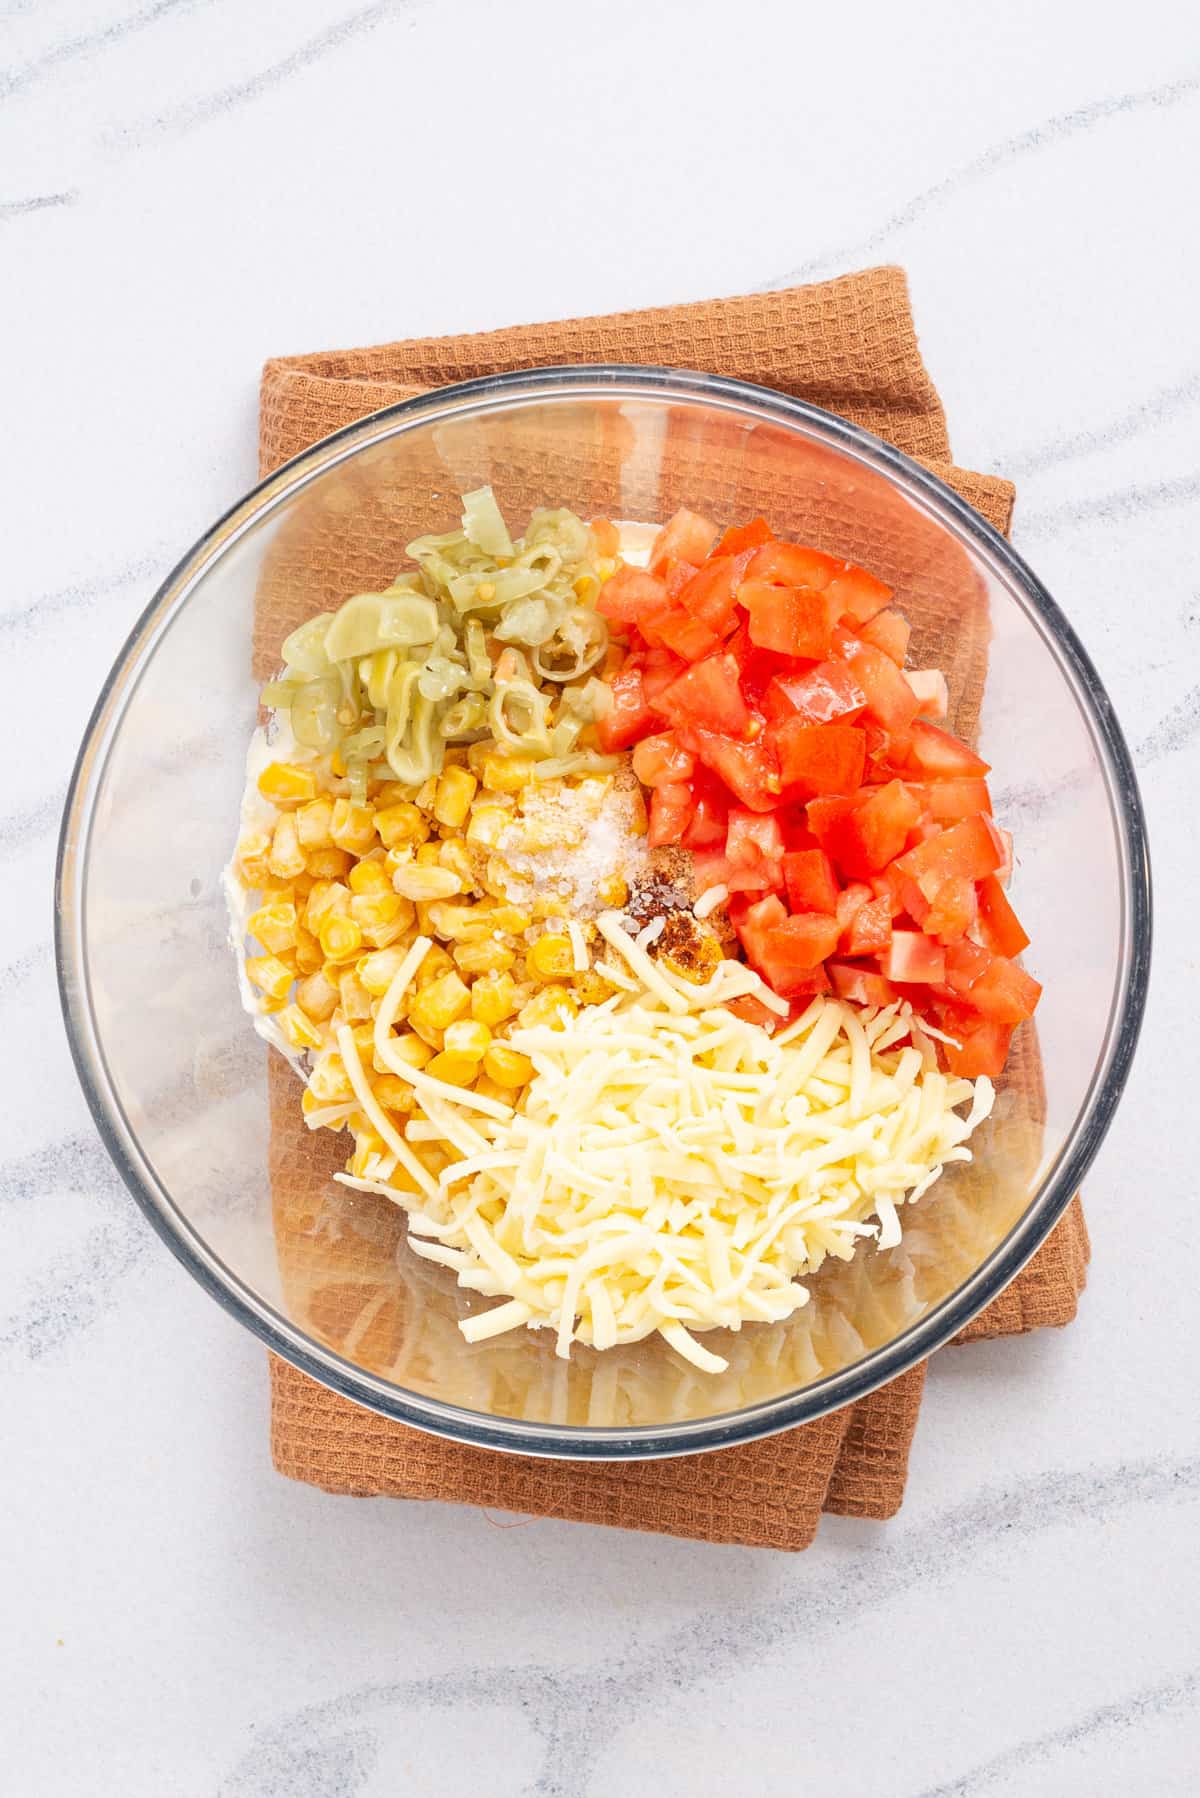 An overhead image of a bowl with sweet corn, onion powder, chili powder, salt, pepperoncinis, tomatoes, cheddar cheese before mixing together.